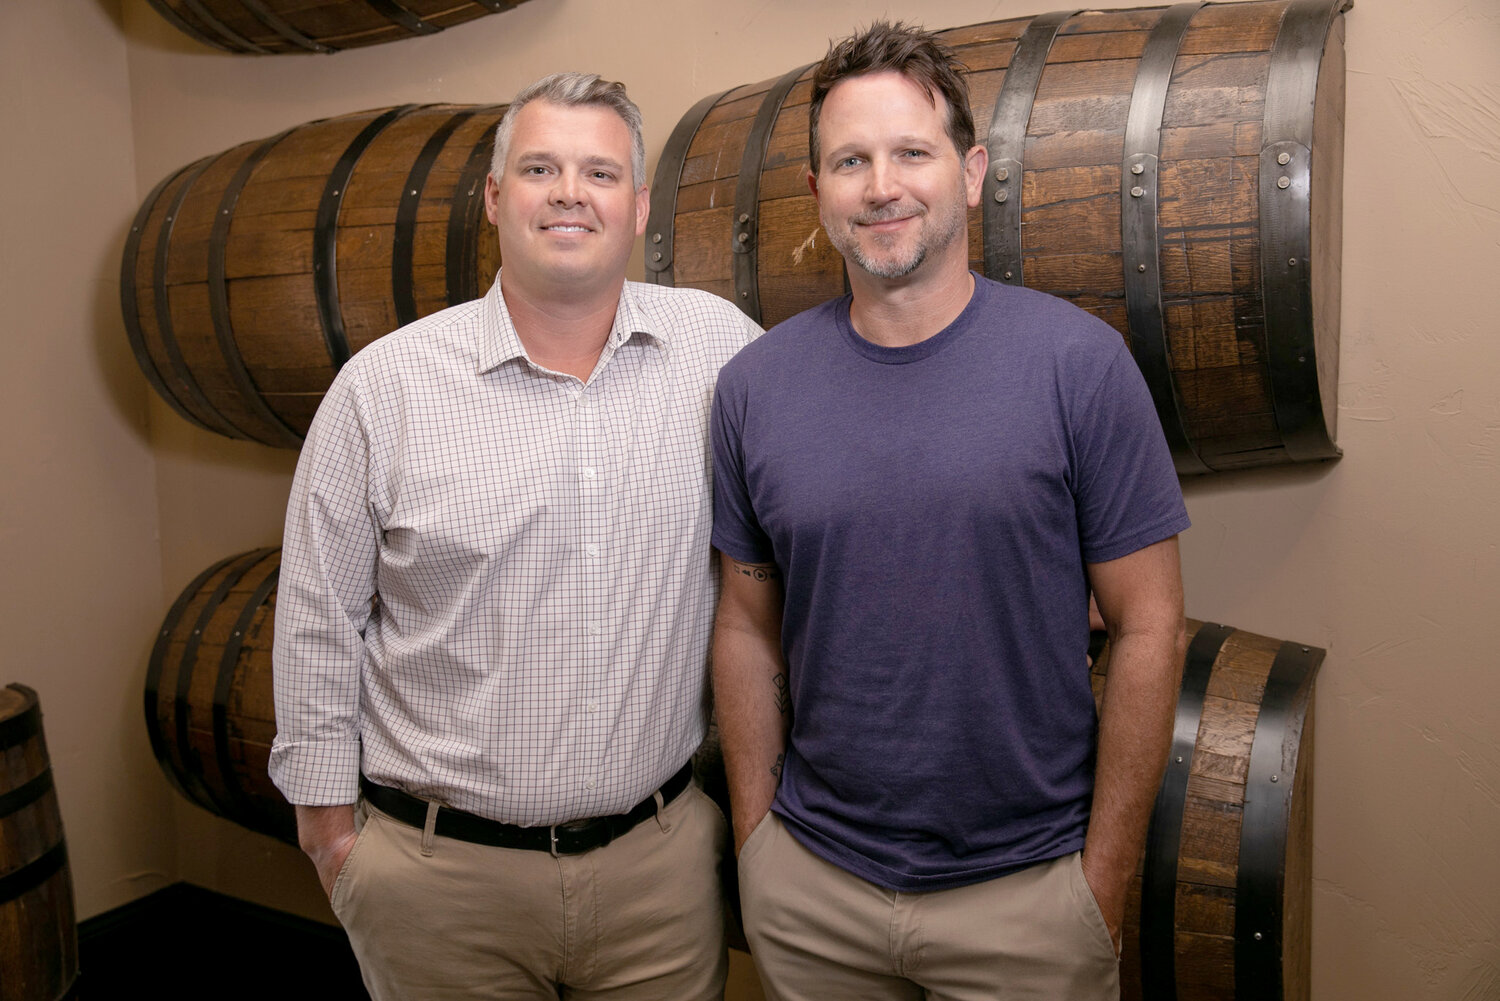 GROWTH MODE: Big Whiskey's co-CEOs Austin Herschend and Paul Sundy plan to open eight restaurants in the next year, including the company's first in Florida.